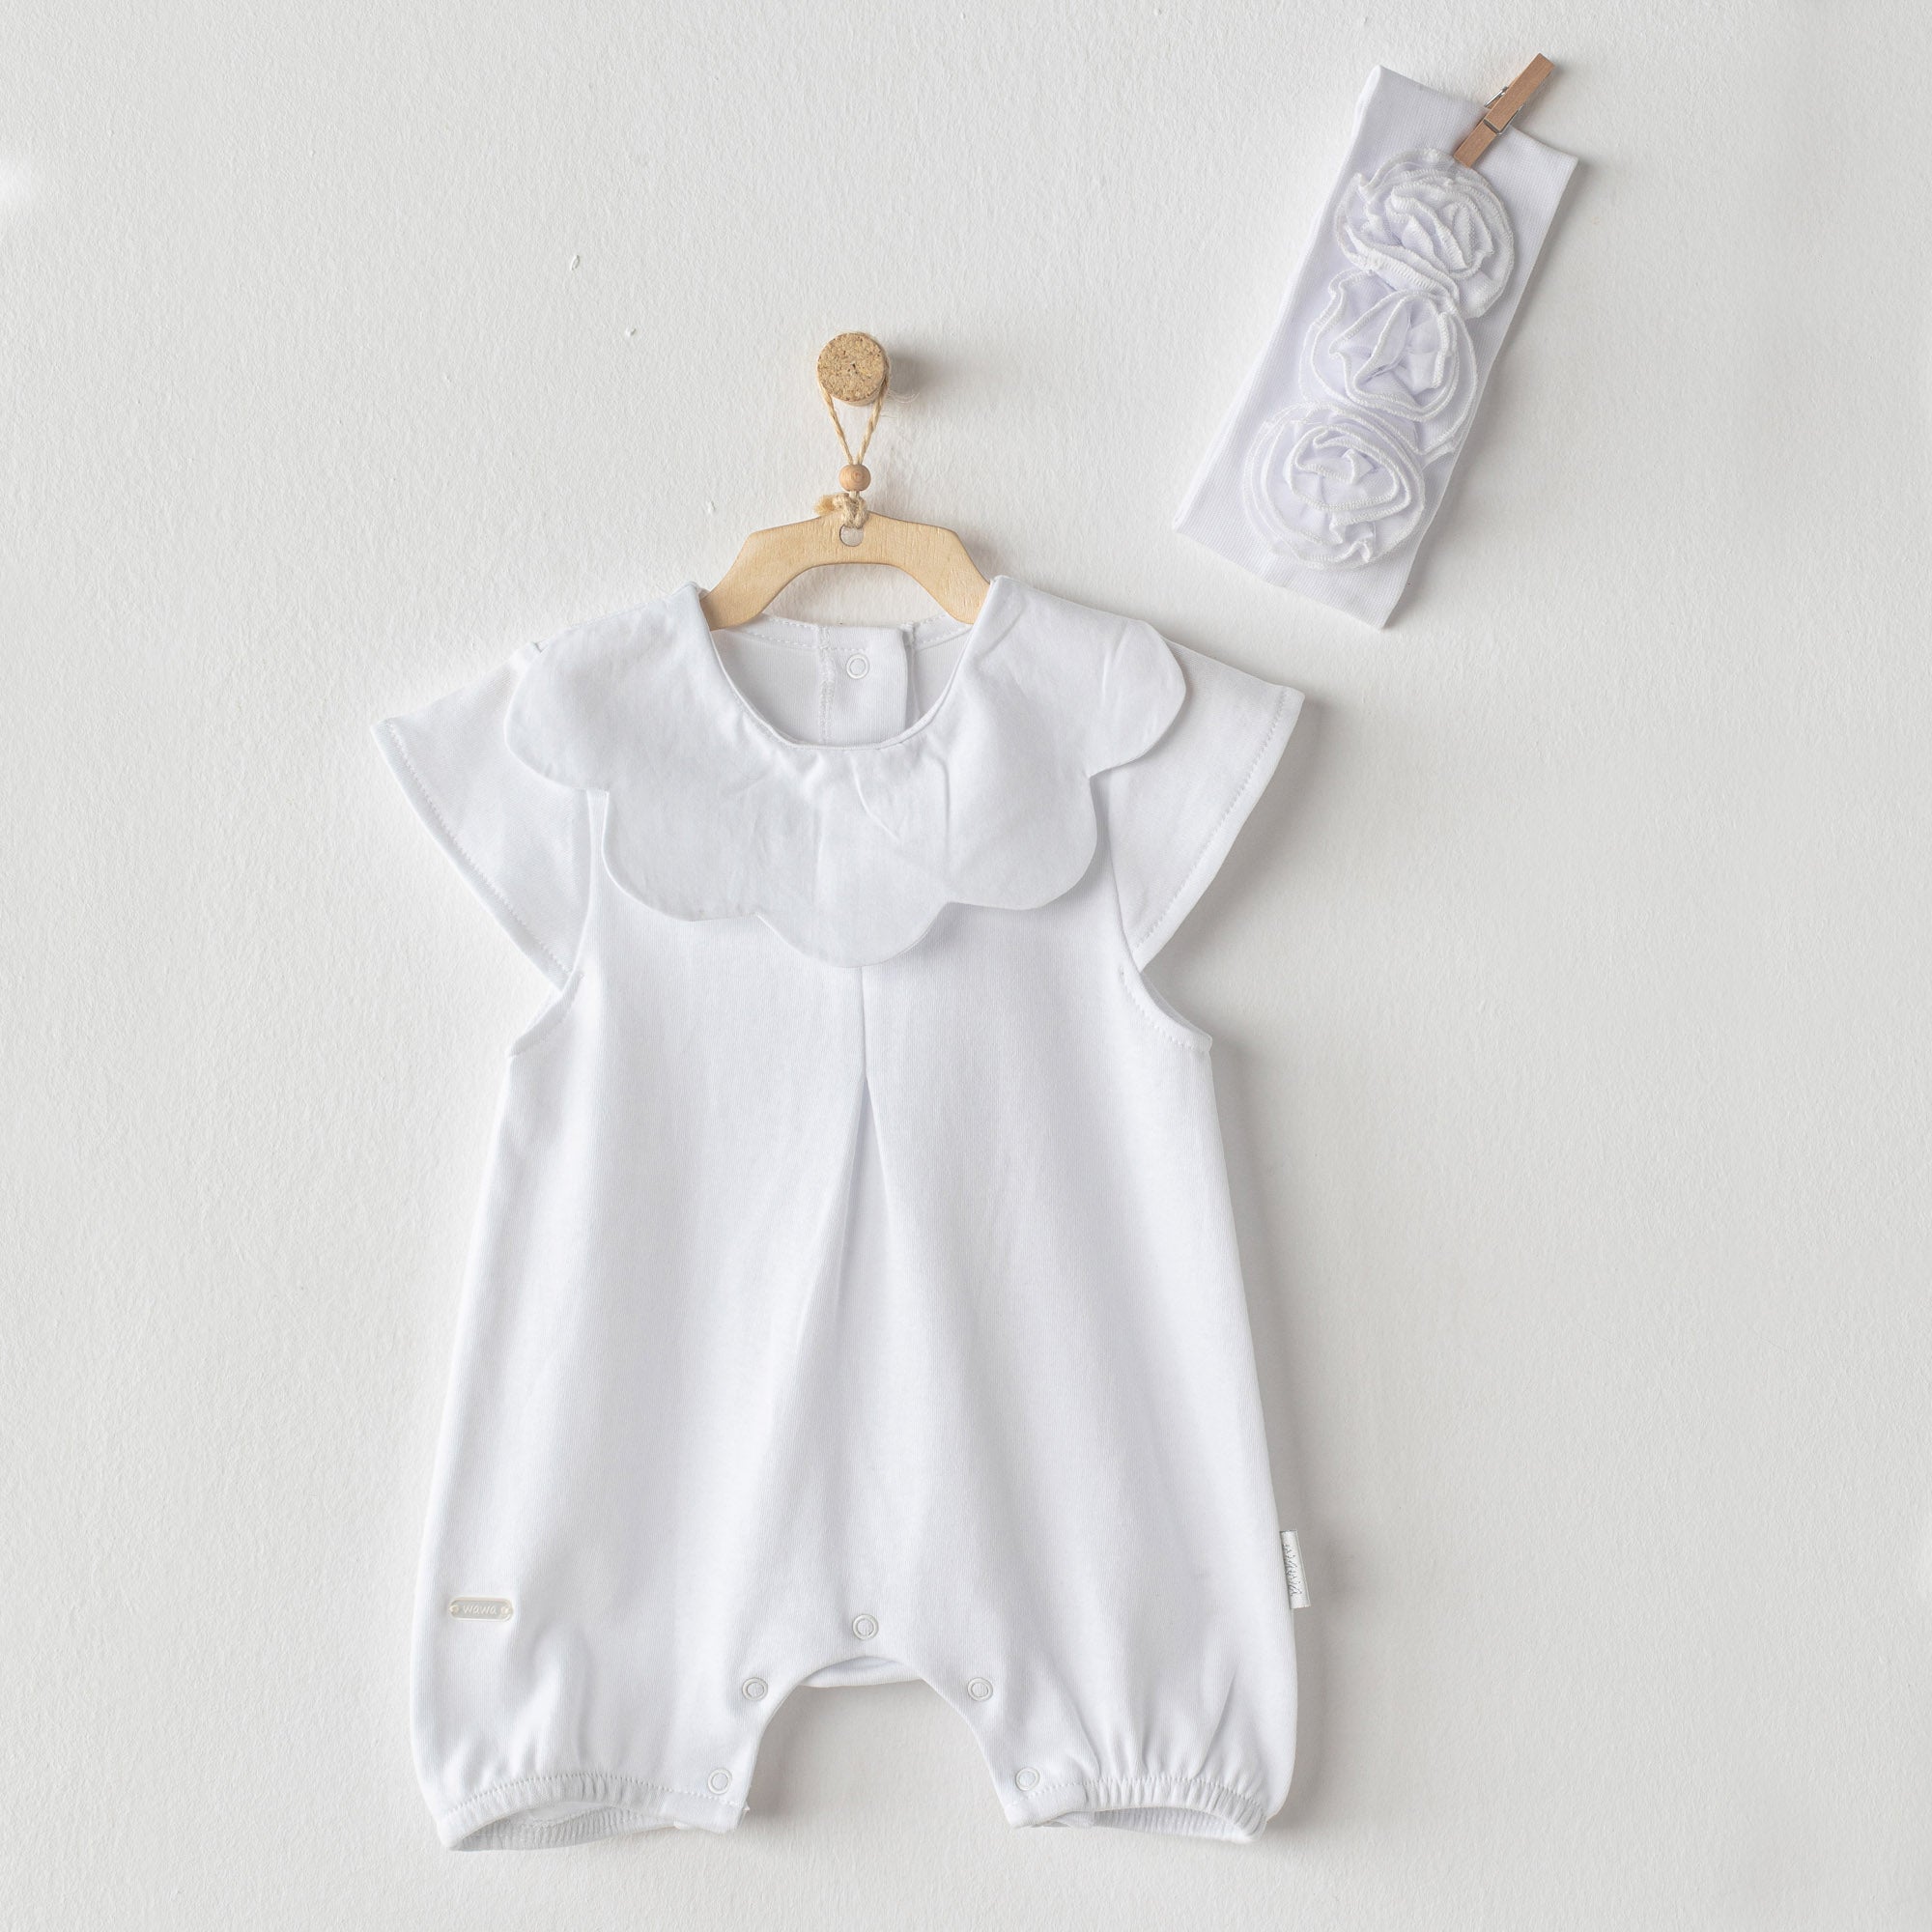 Baby girl white summer romper - Baby girl white summer romper - 1-3 Months - Andywawa - Melymod